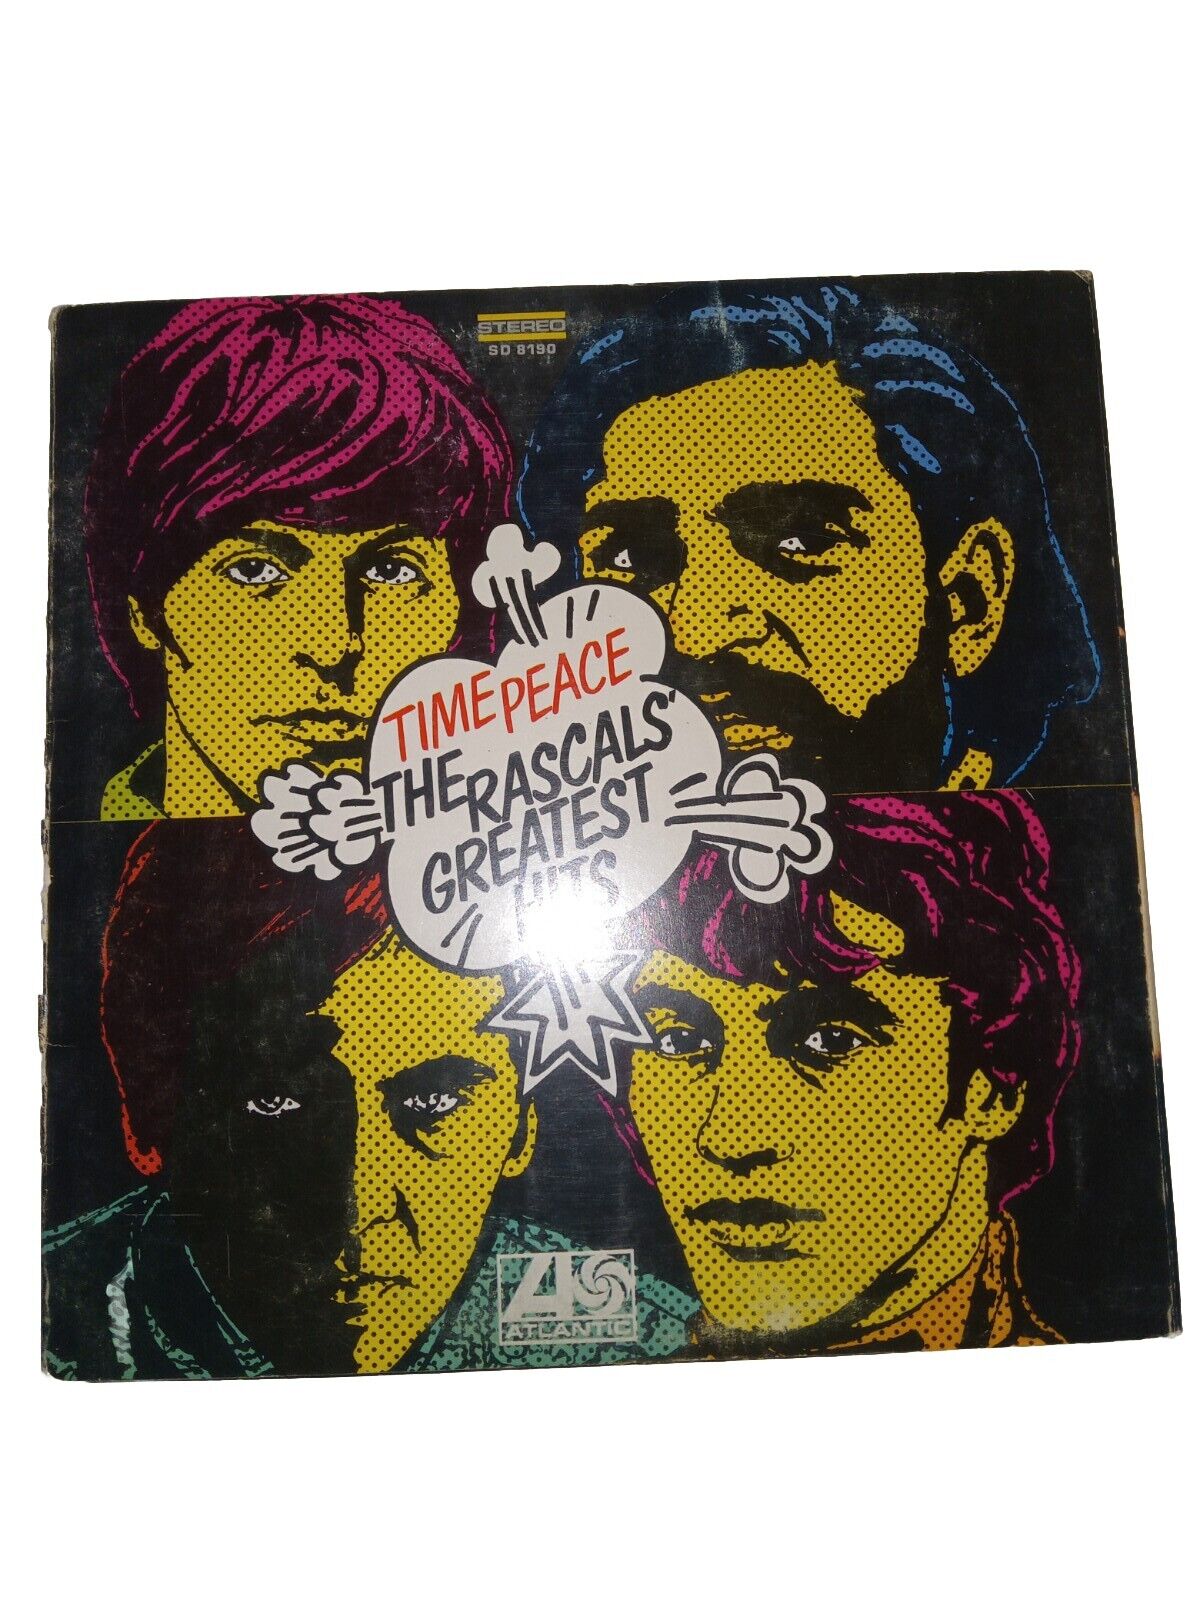 TIME PEACE THE RASCALS GREATEST HITS  VINYL STEREO LP RECORD OG